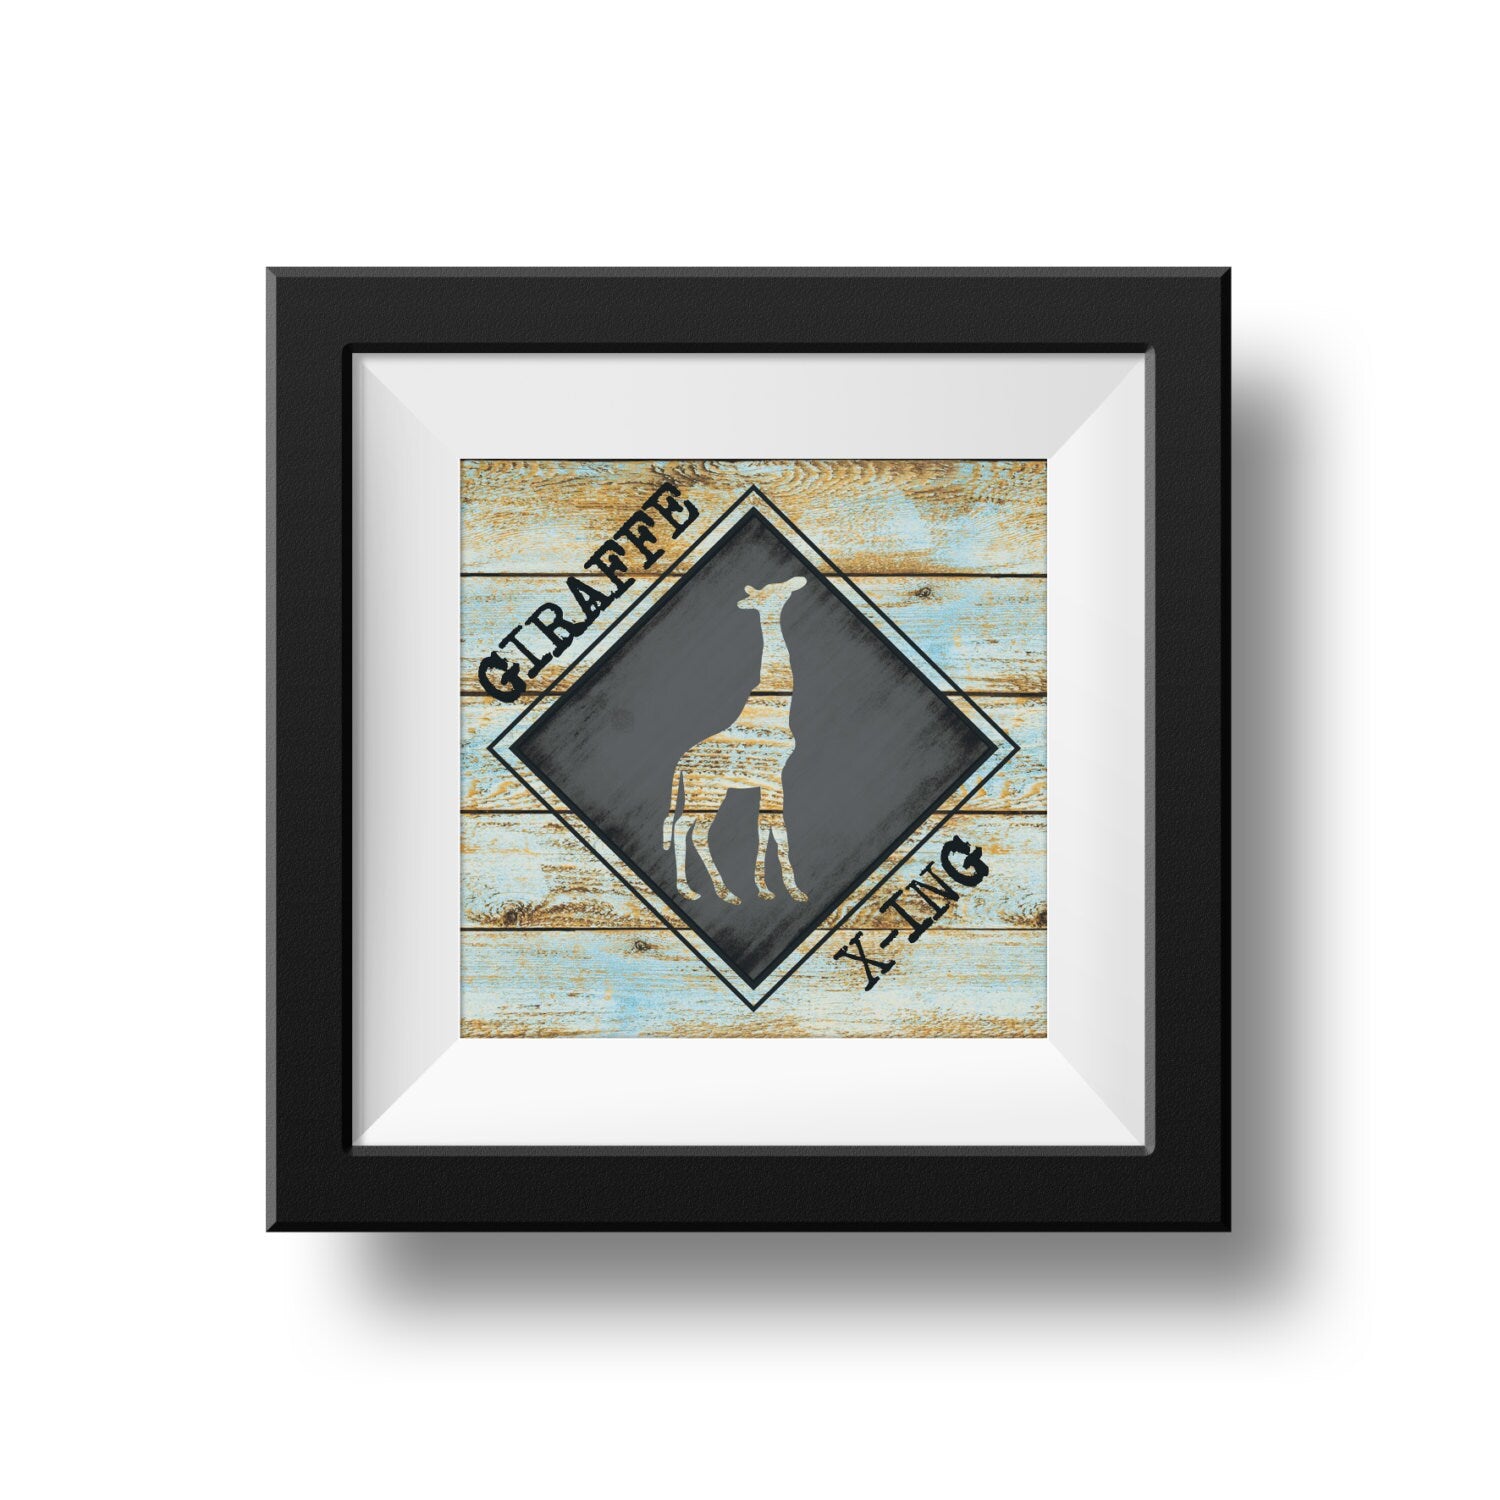 Giraffe X-ING Crossing Art Print Instant Download 8 1/2" x 11" Paper Print Is 8" x 8" Square Road Sign Africa Animal Child Wall Decor Teal